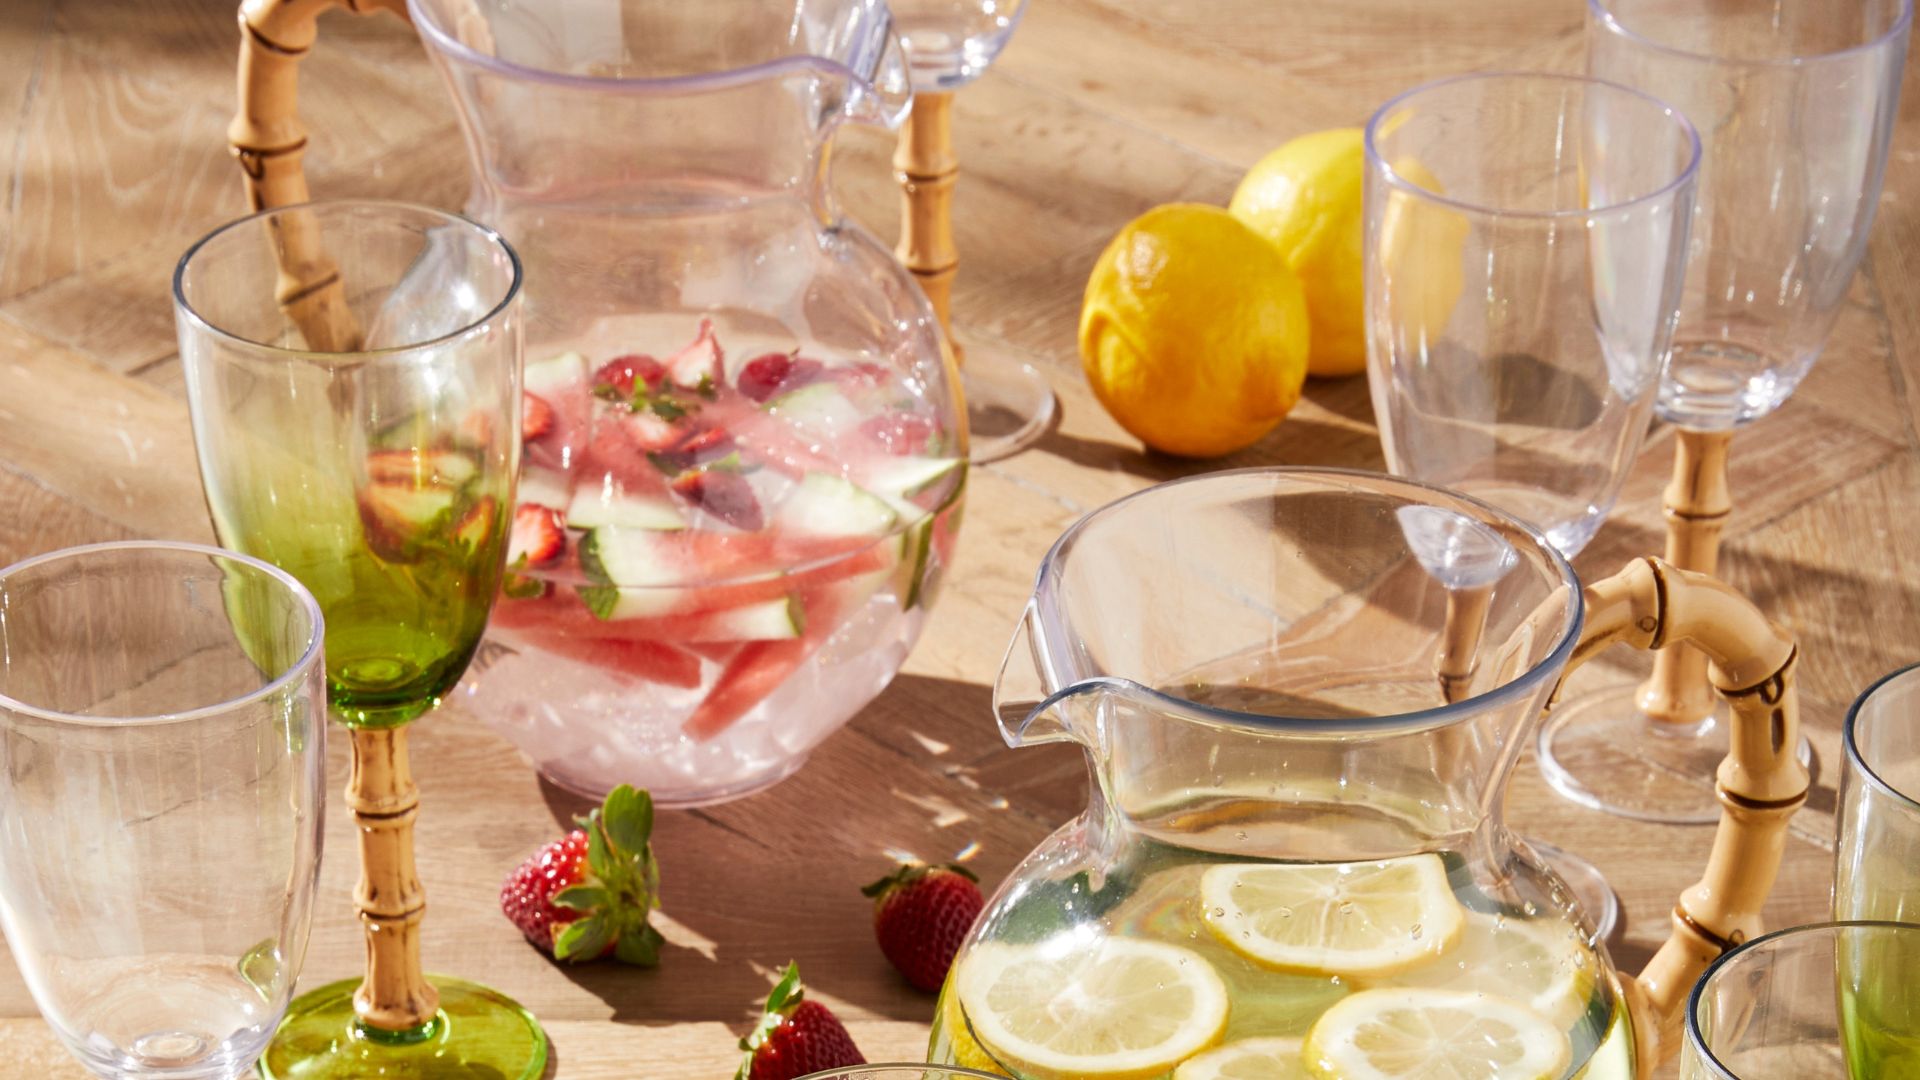 Clear glass drinkware for casual summer dining